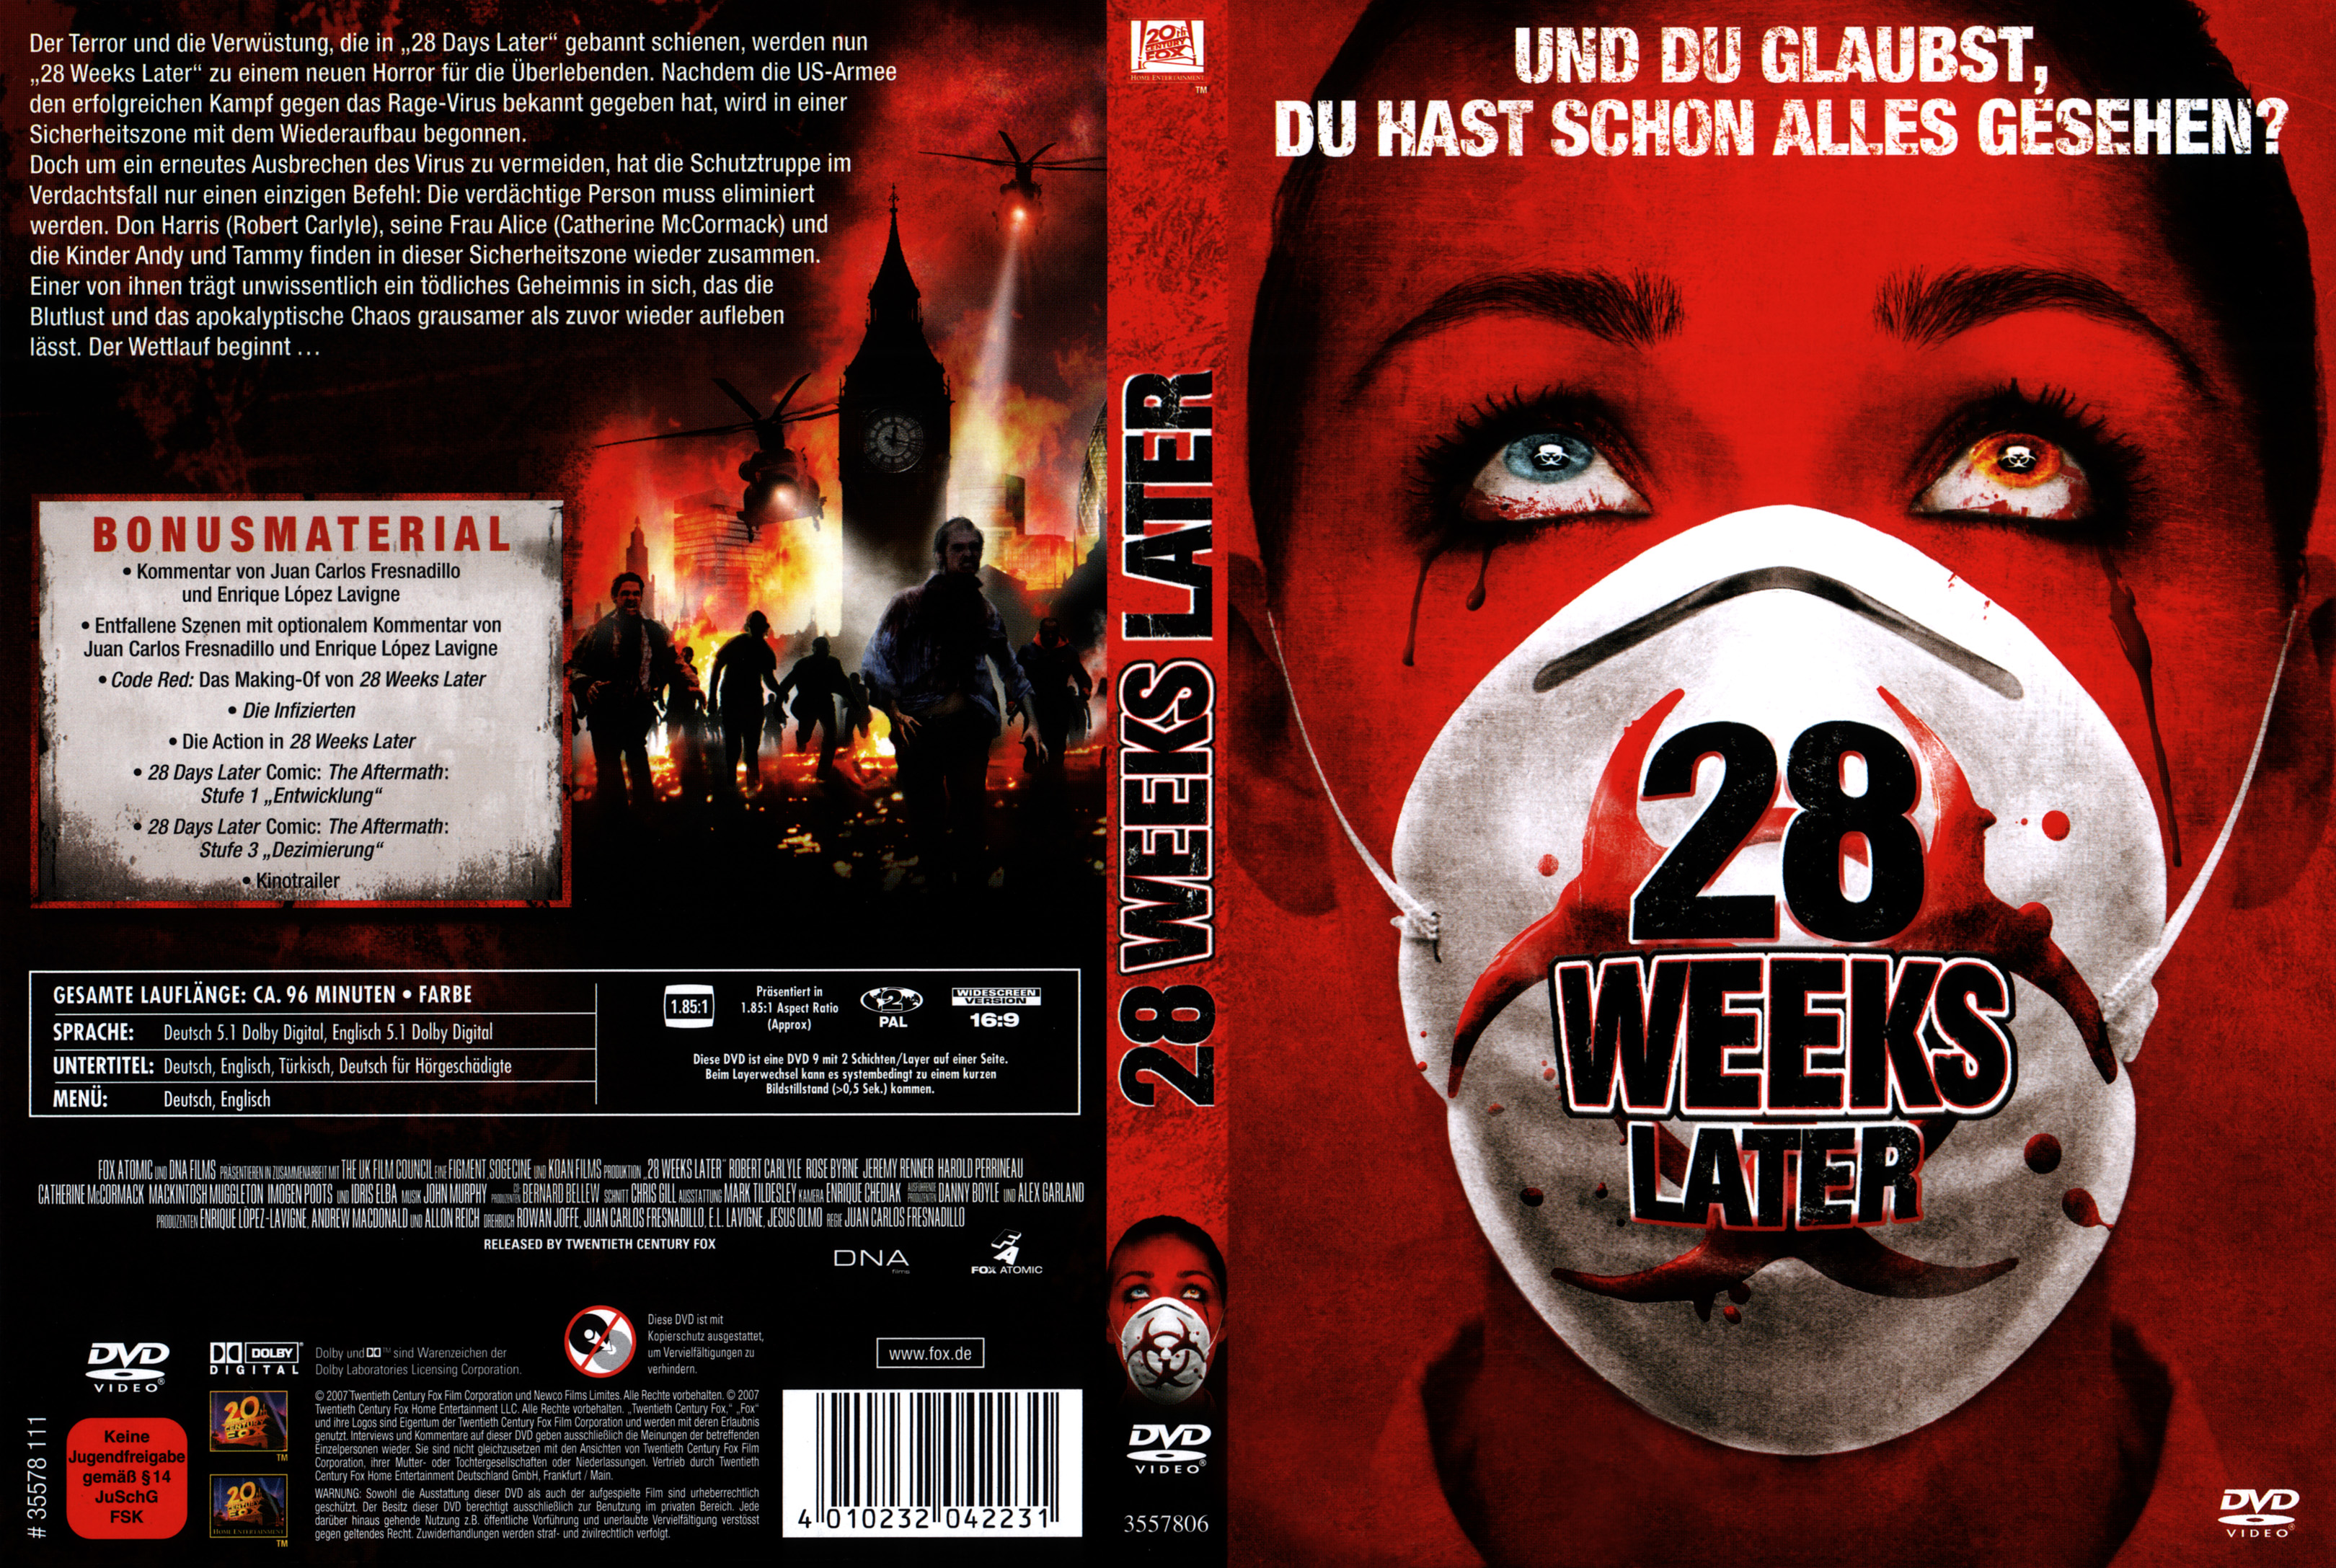 28 Weeks Later #9